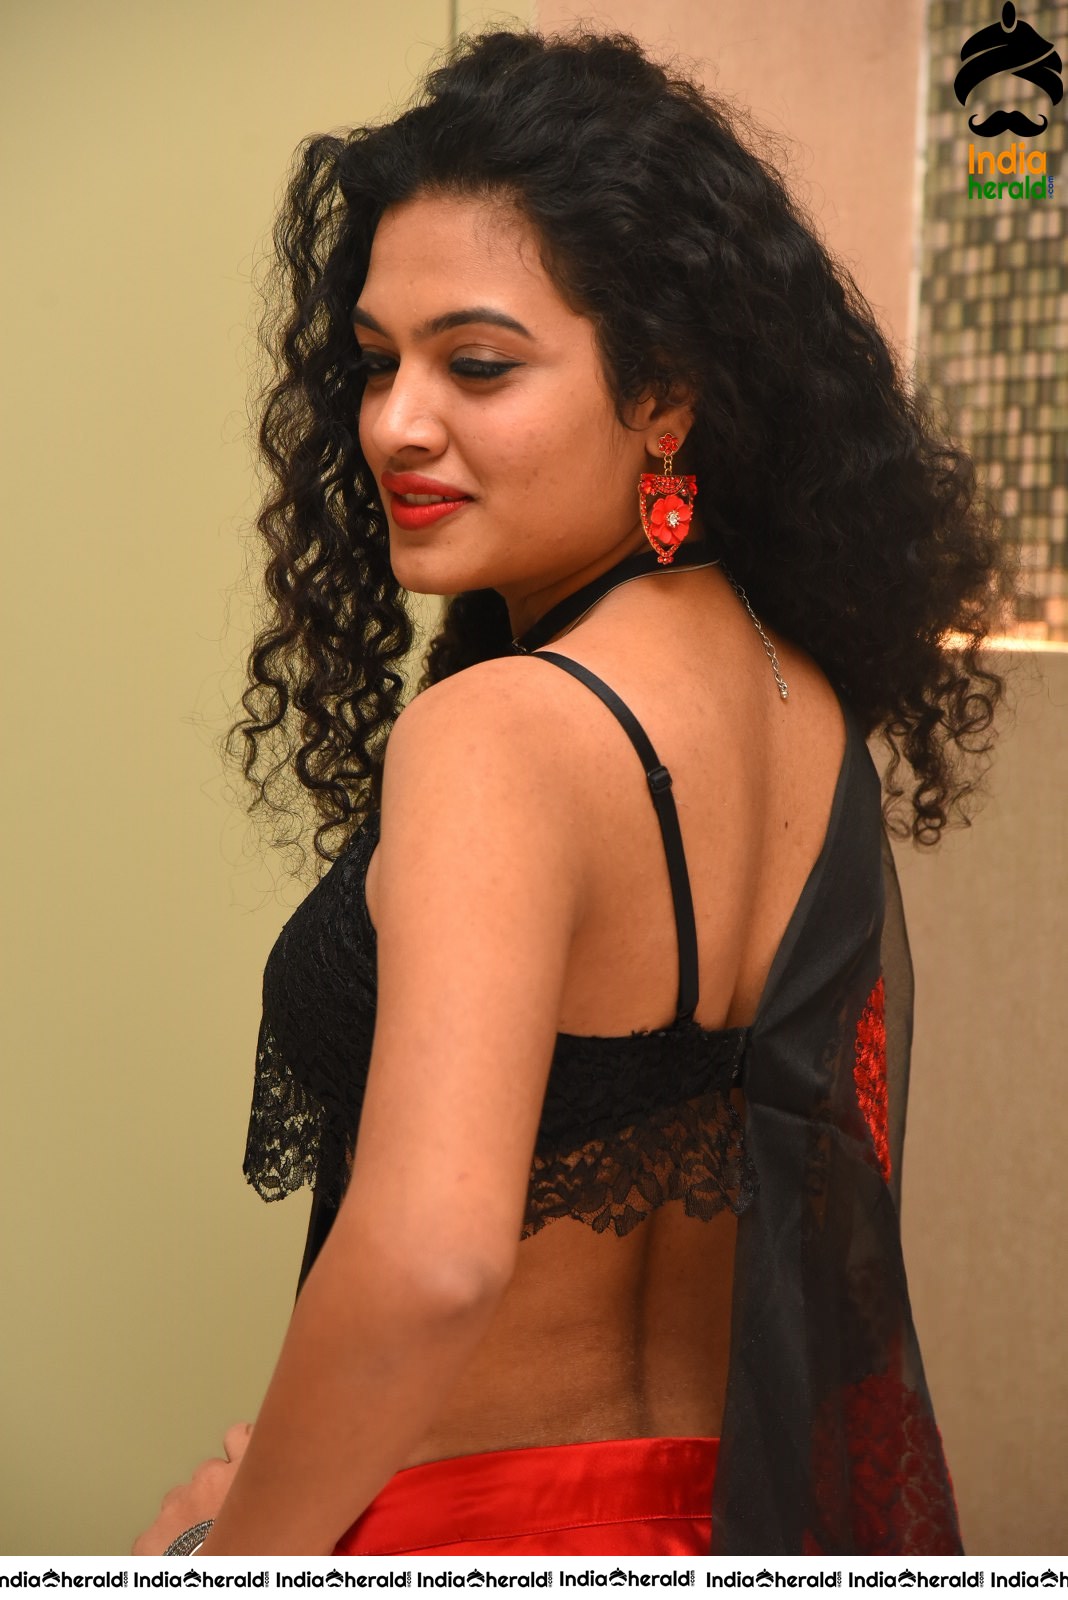 Riya Sizzling Hot Waist and Navel Show in Black Brassiere and Red Skirt Set 2